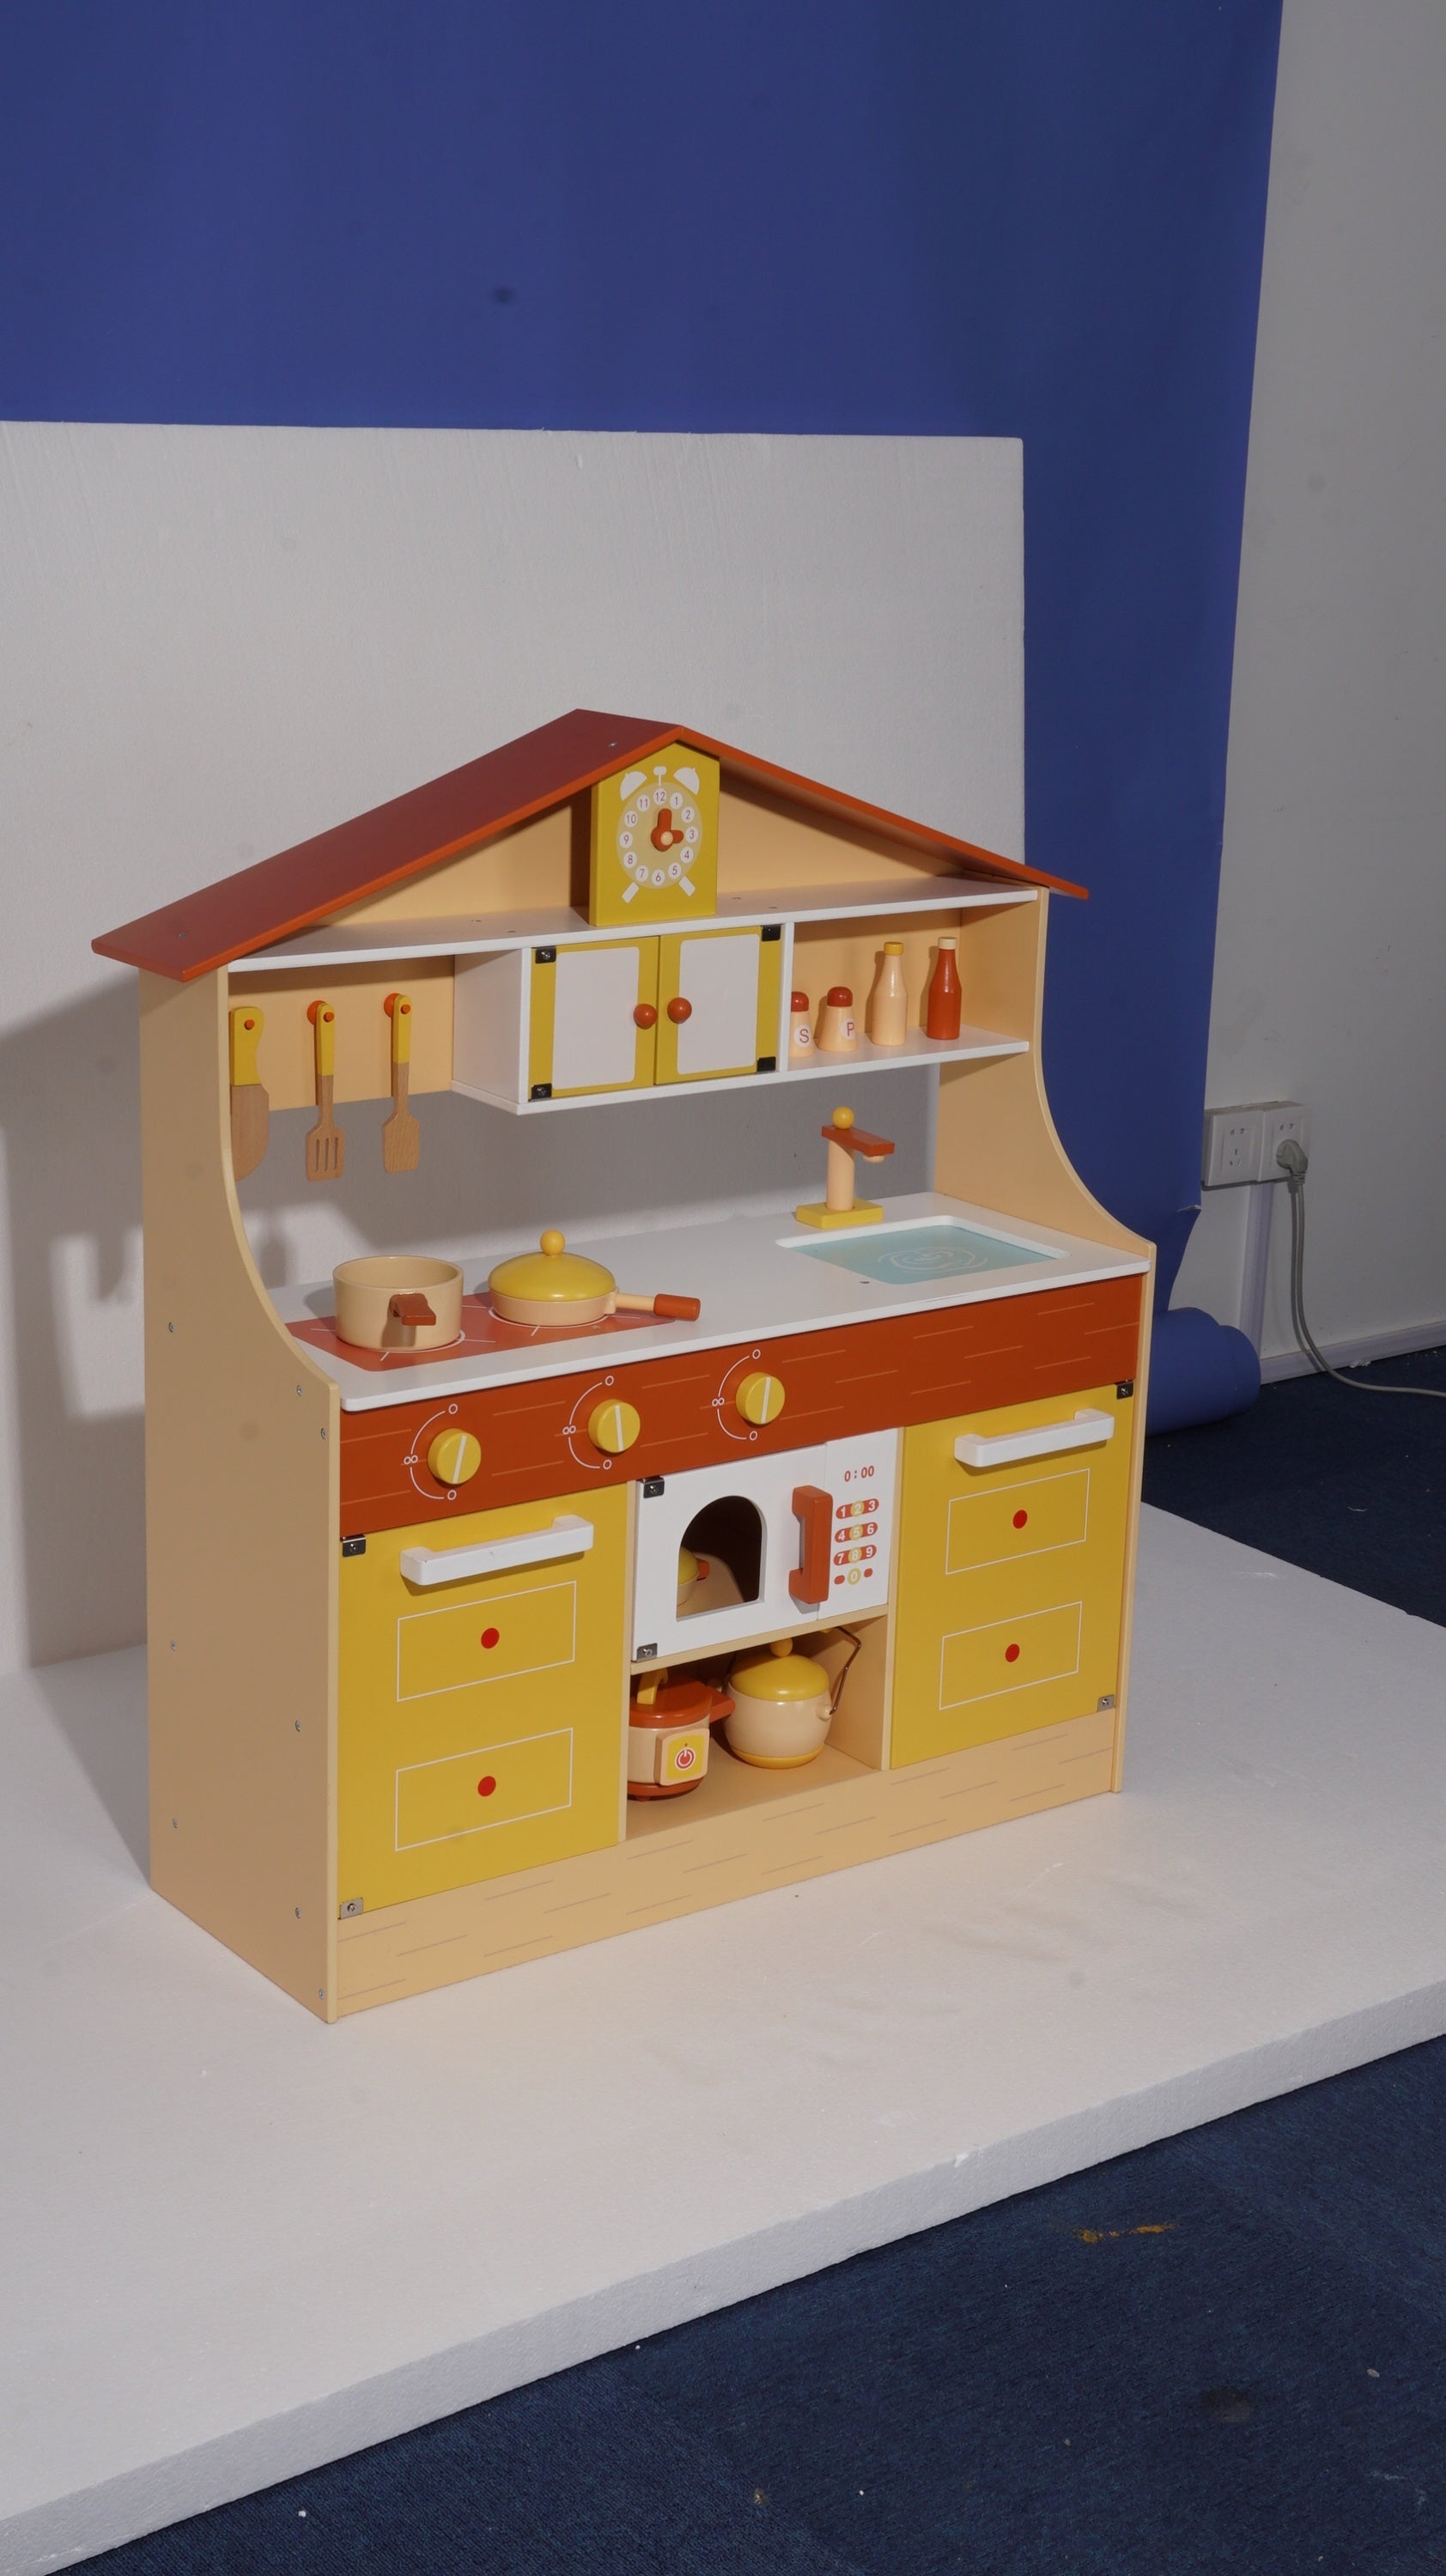 Wooden Pretend Play Kitchen Set for Kids Toddlers, Toys Gifts for Boys and Girls,Yellow - Tonkn